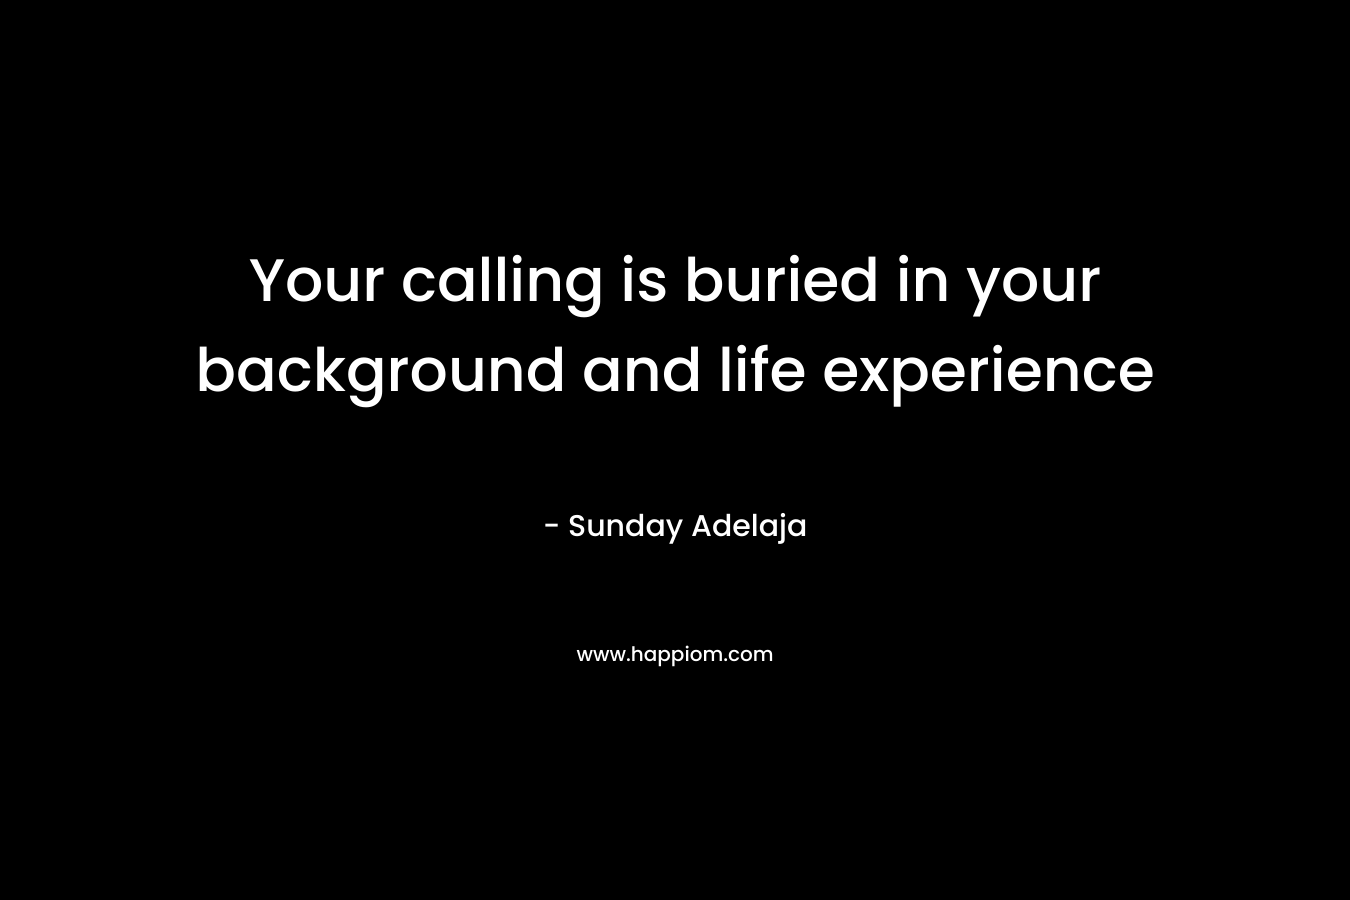 Your calling is buried in your background and life experience